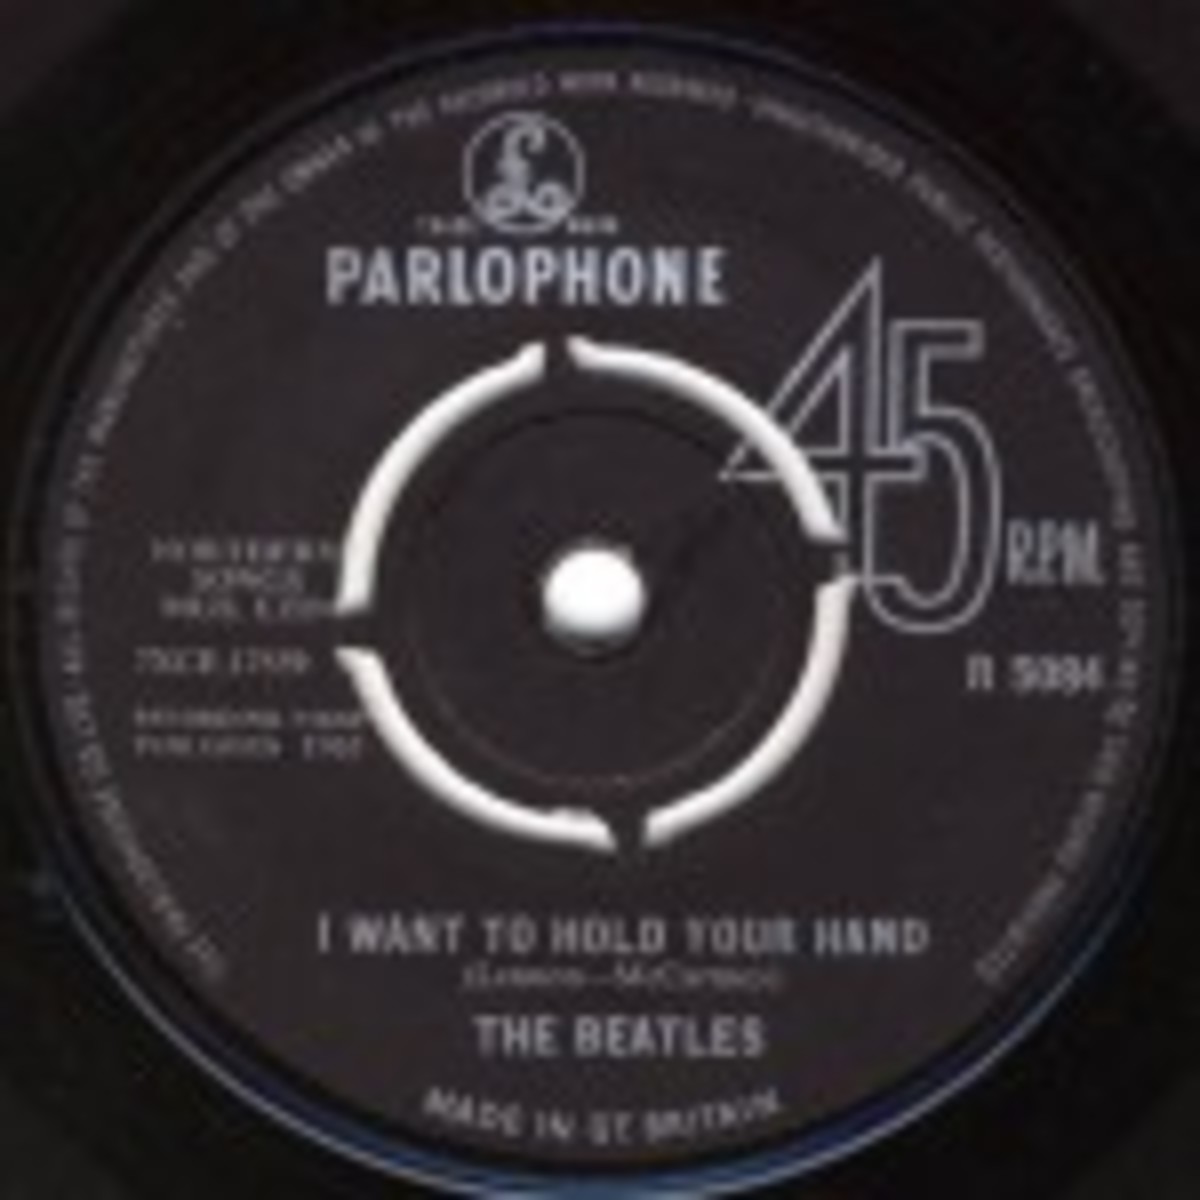 The Beatles I Want To Hold Your Hand